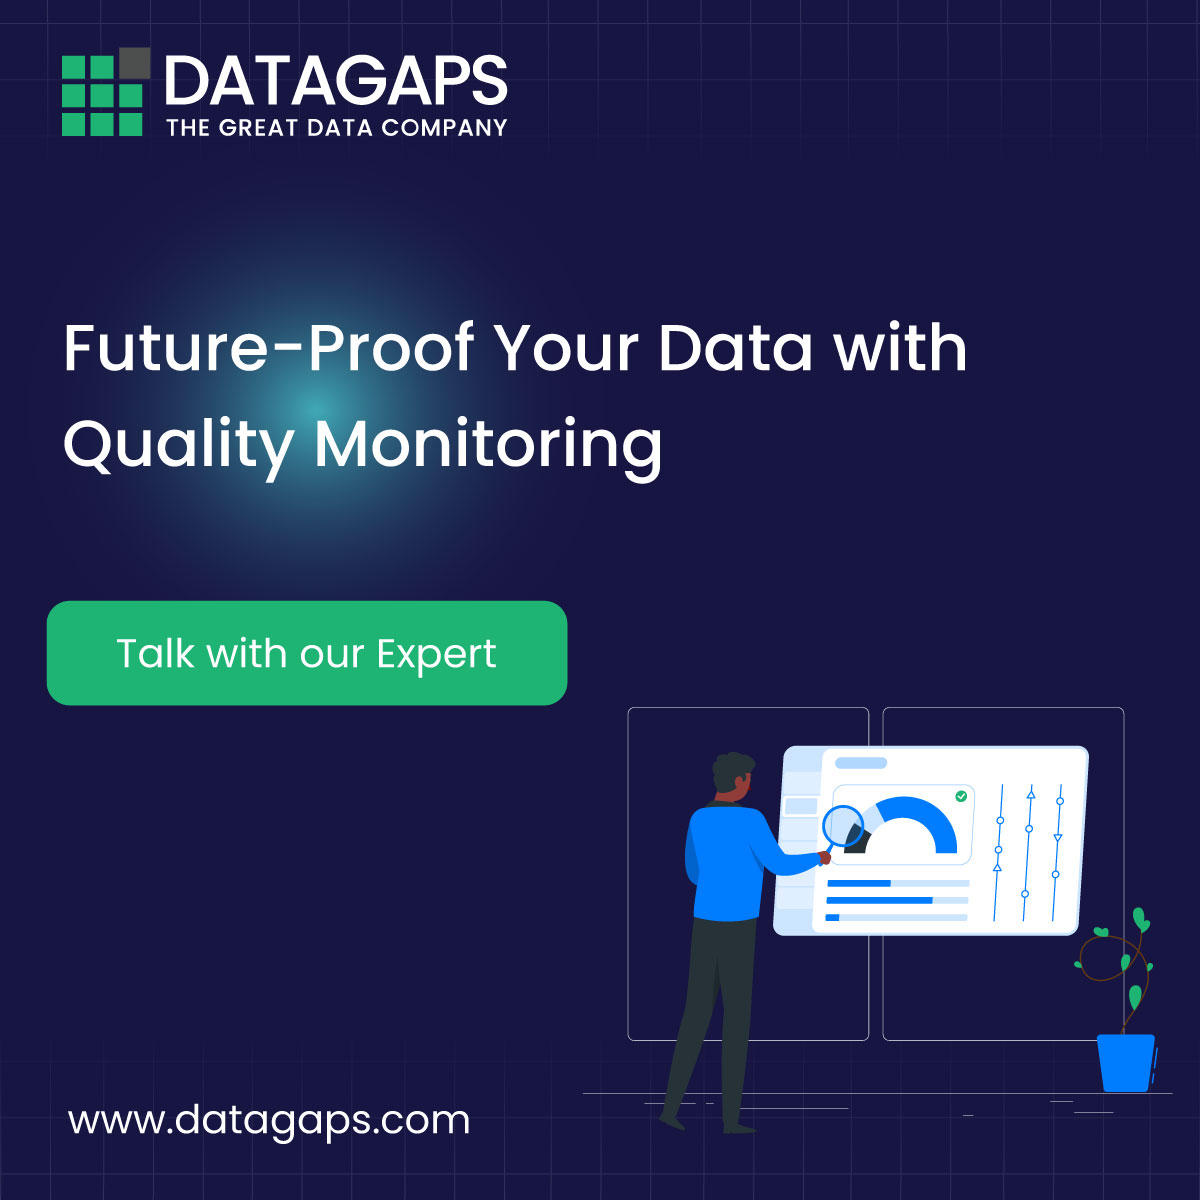 Invest in Data Quality Monitoring: Boost Power BI & Gen AI for a data-driven future. 🛡️🌐
datagaps.com/dataops-data-q…
#QualityInvestment #PowerBI